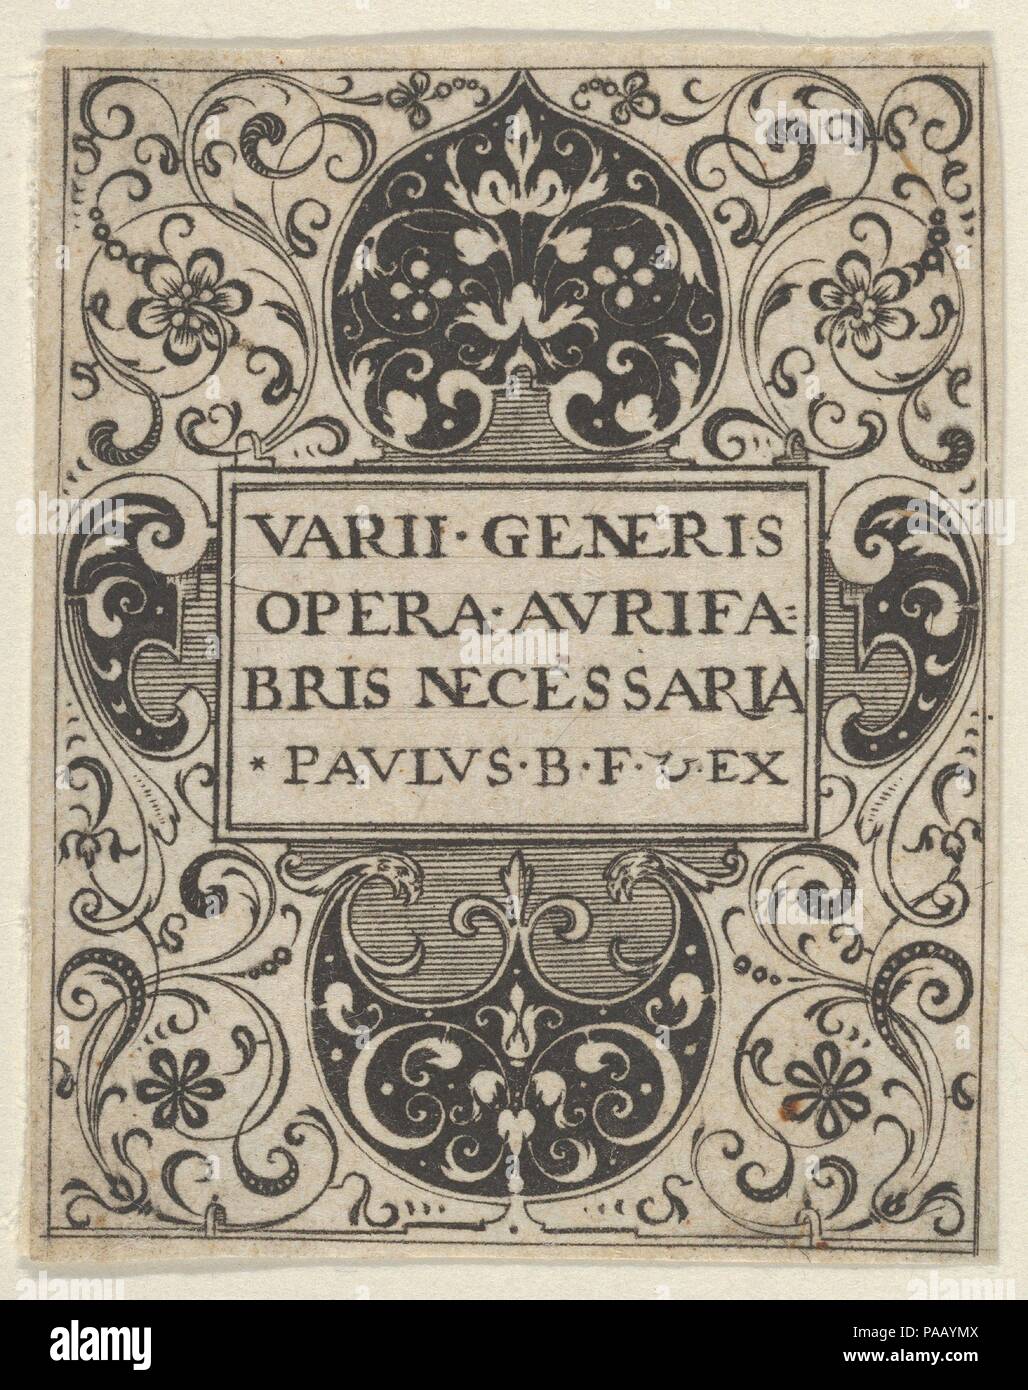 Title Page, from Varii Generis Opera Aurifabris Necessaria. Artist: Paul Birckenhultz (1561-1639). Dimensions: Sheet: 1 13/16 × 1 7/16 in. (4.6 × 3.7 cm). Date: ca. 1600.  Title page with title in rectangular frame at center, with large rounded areas of ornamental blackwork above and below the central plaque, and smaller areas of blackwork design at left and right. From a series of six plates of ornamental designs. Museum: Metropolitan Museum of Art, New York, USA. Stock Photo